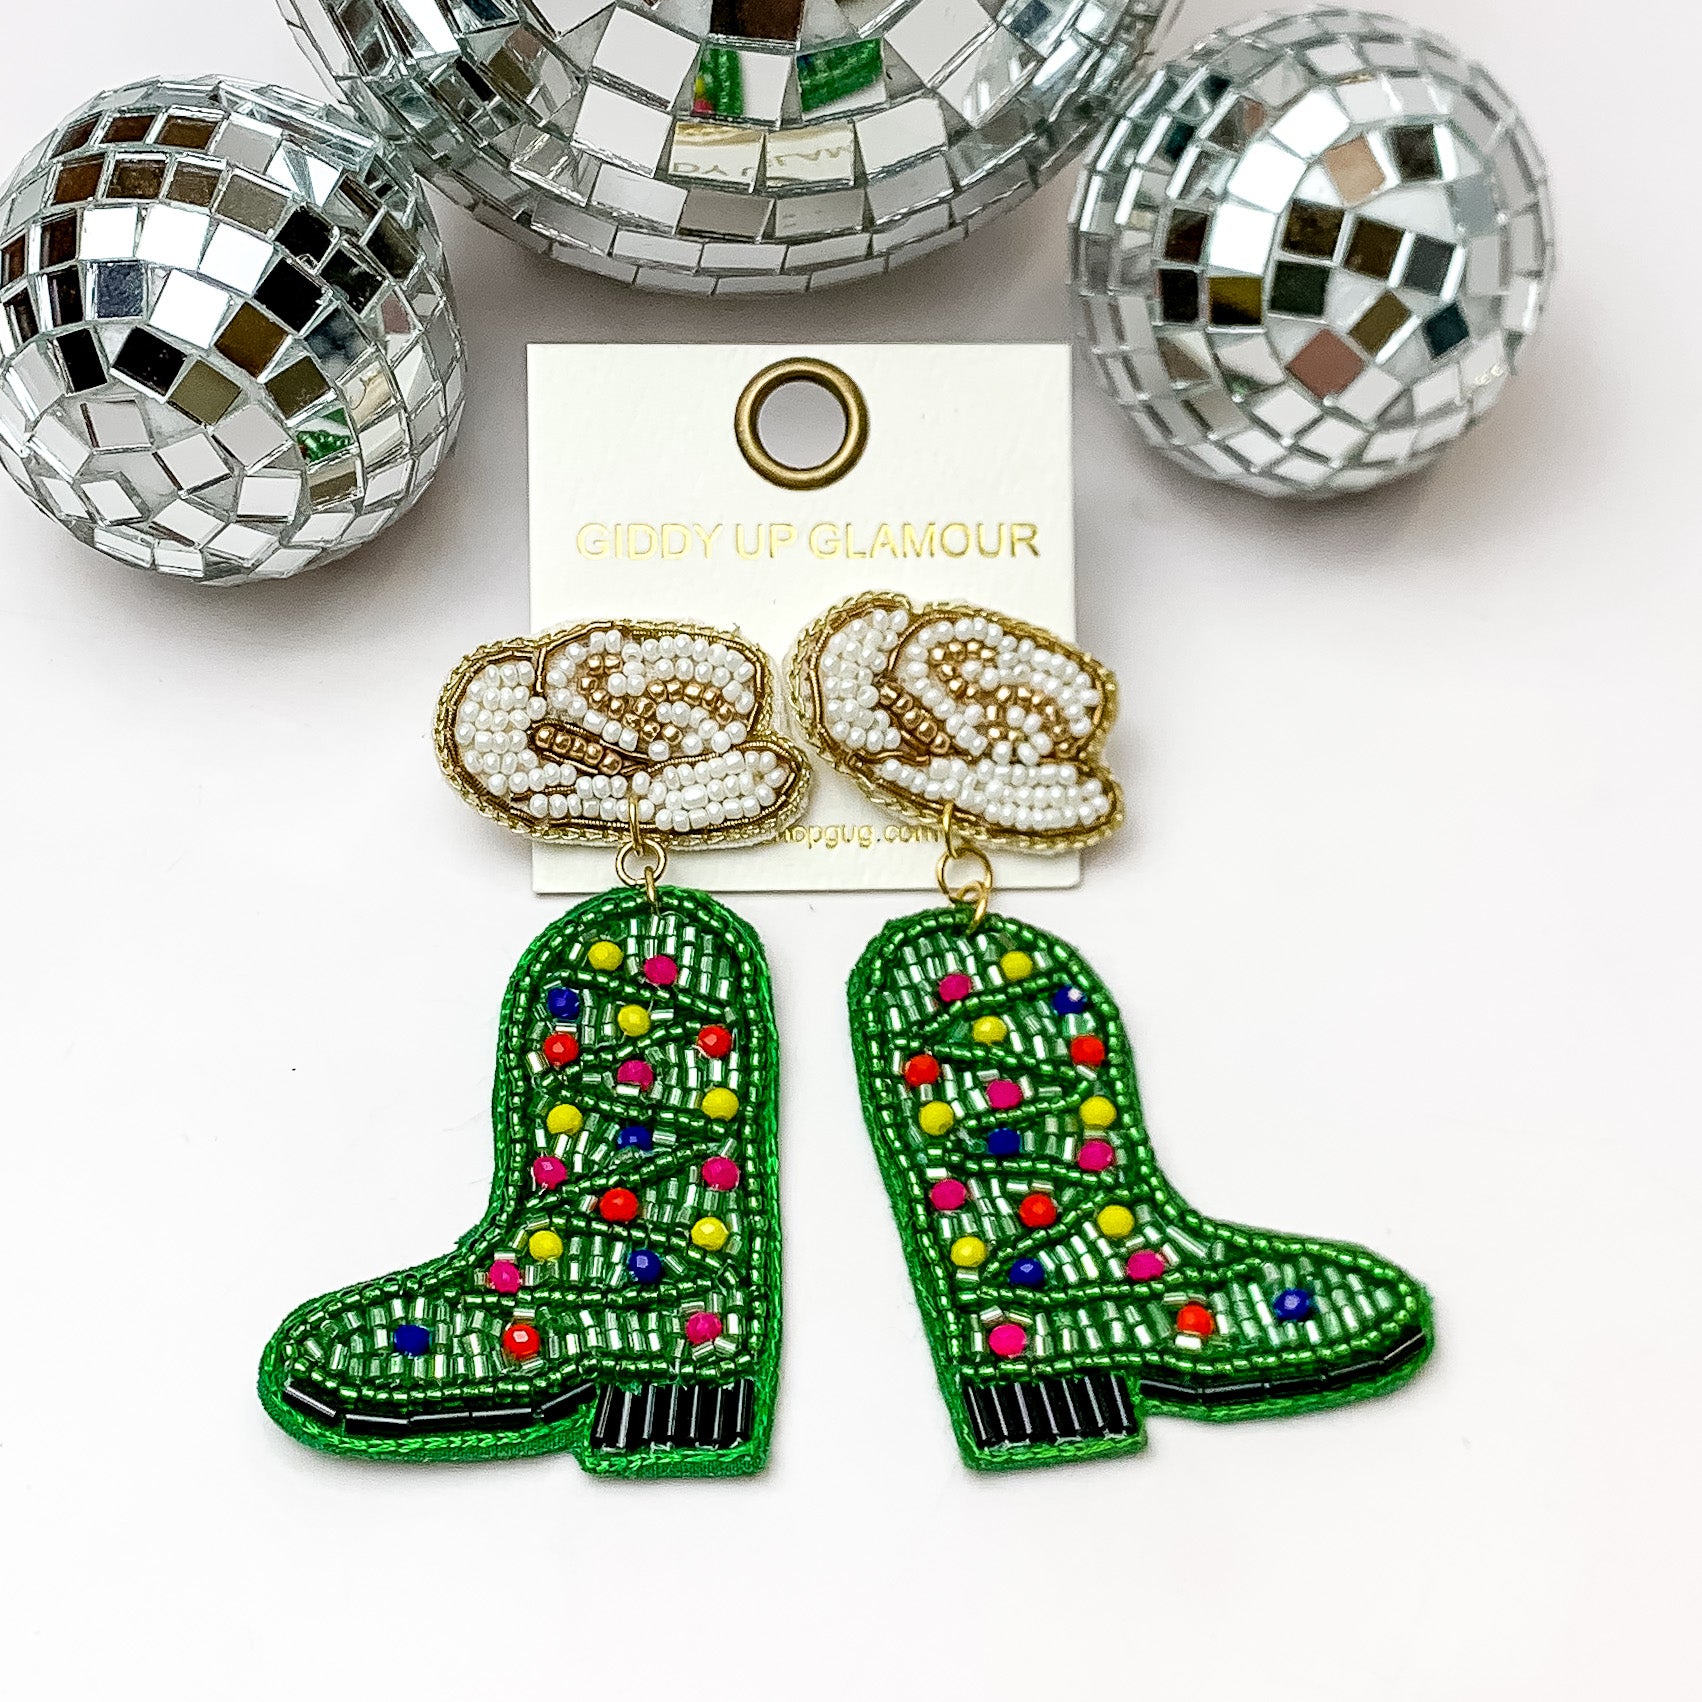 White and gold hat post earrings with green christmas tree boot shaped earrings. These earrings are pictured on a white background with disco balls at the top. 